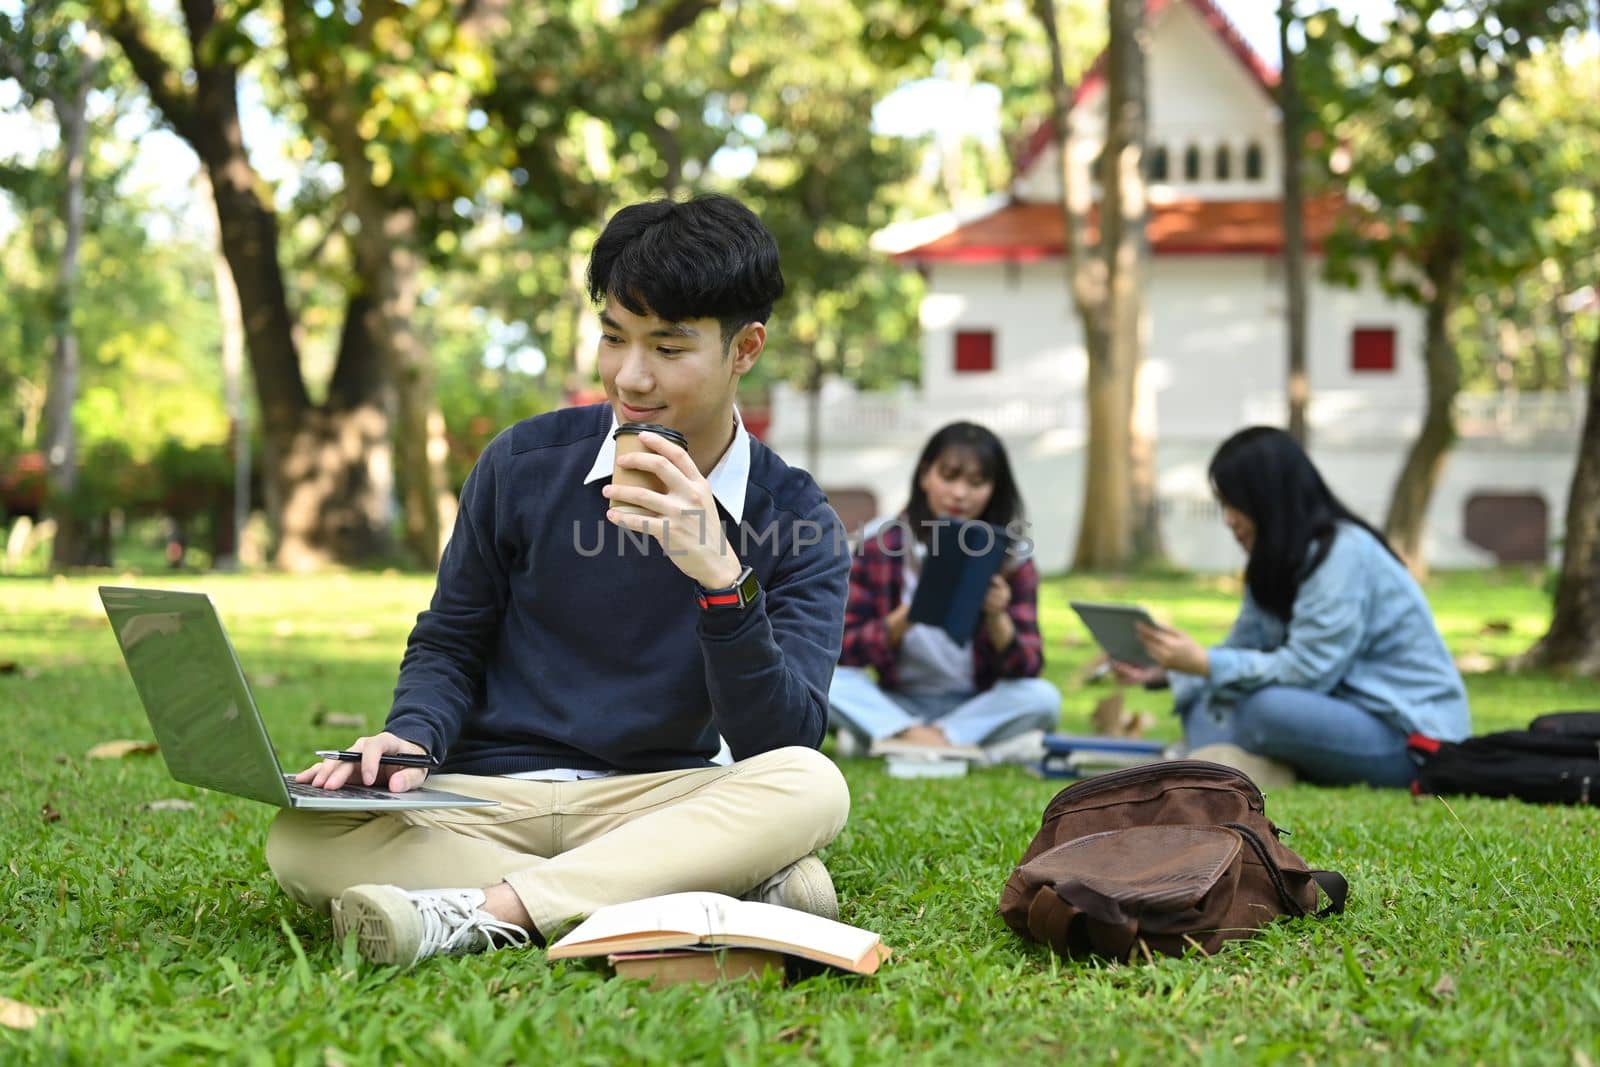 Smiling young asian man sitting on campus lawn and working on laptop computer. Education and lifestyle concept.